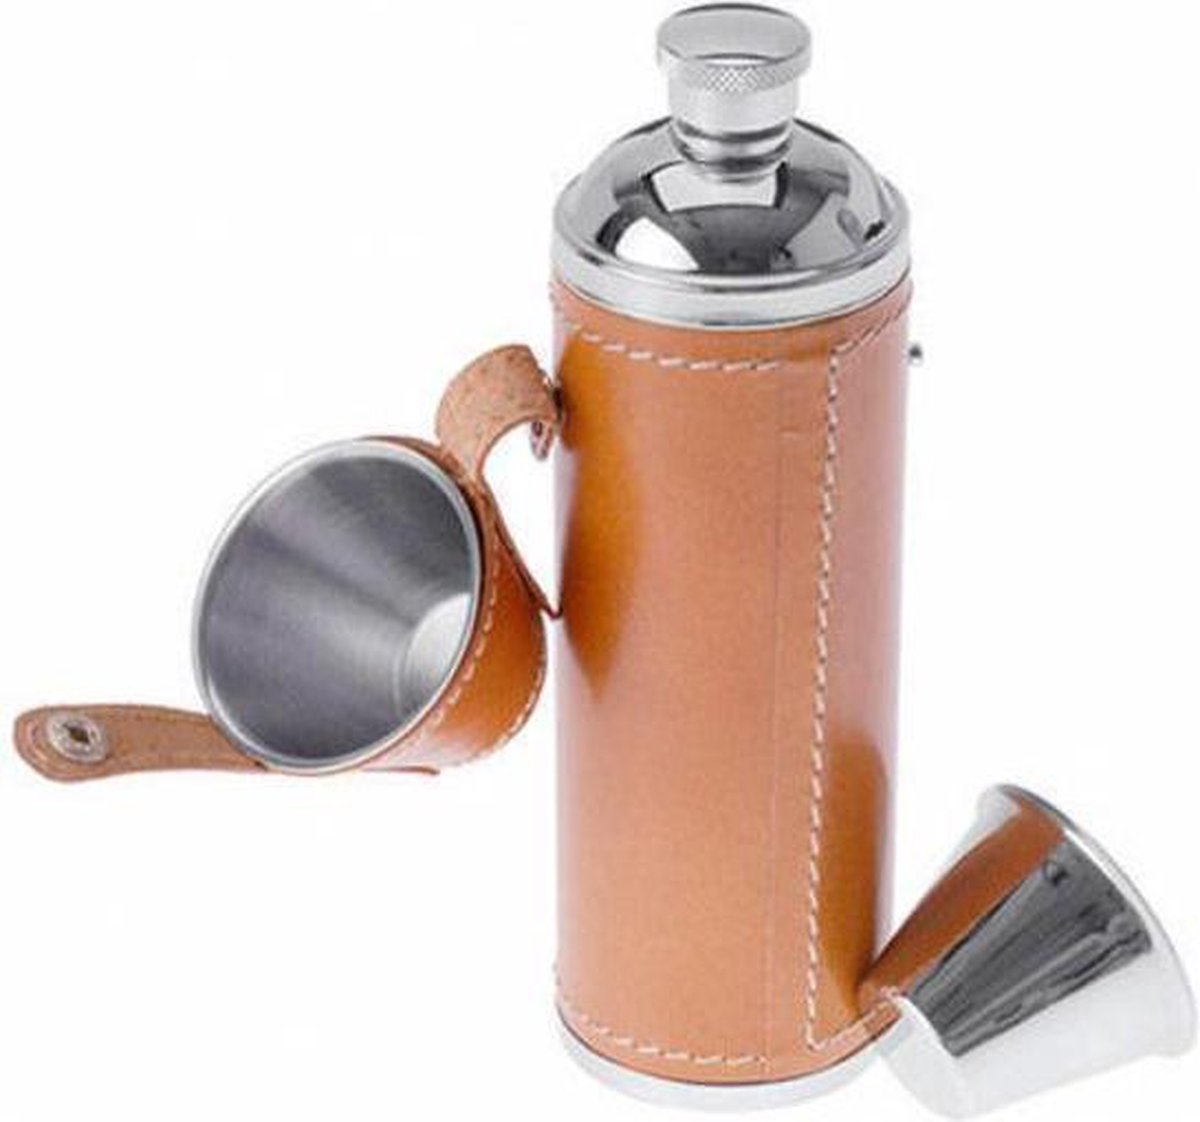 GSI Glacier stainless, leather wrapped, flask